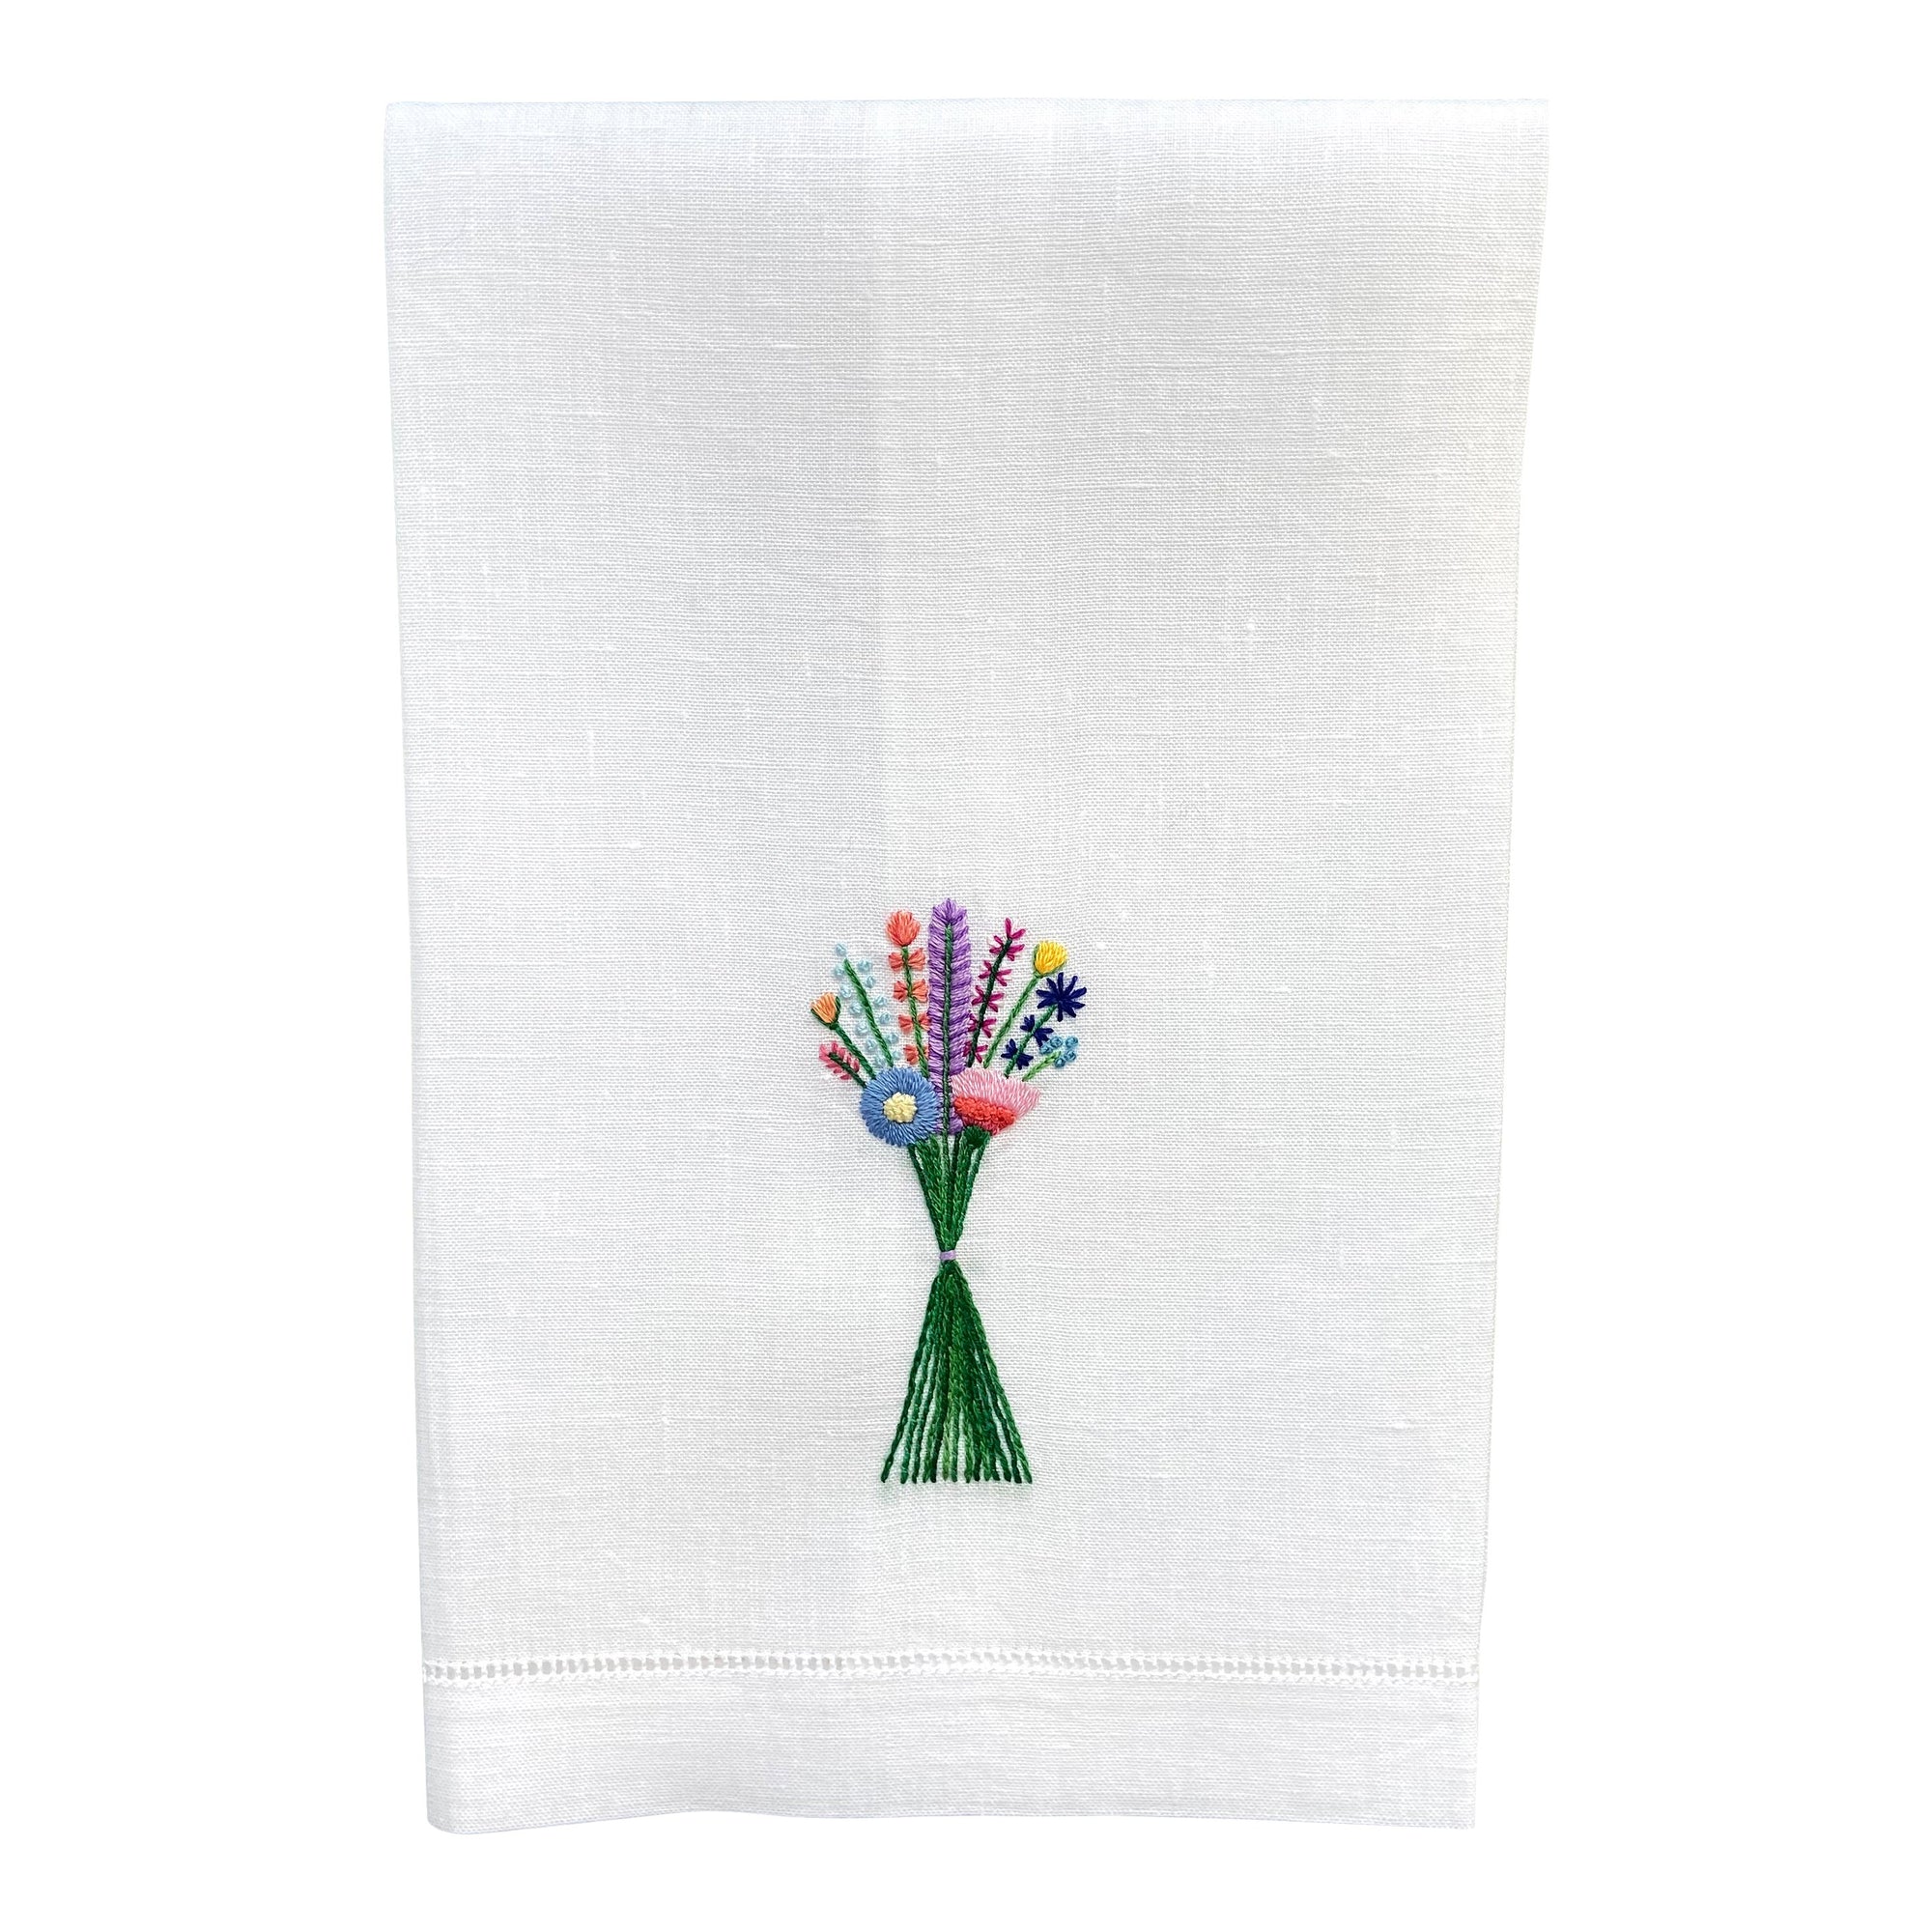 Happy Cactus Designs Hand Embroidered Guest Towel • Design and Image Copyright Happy Cactus Designs